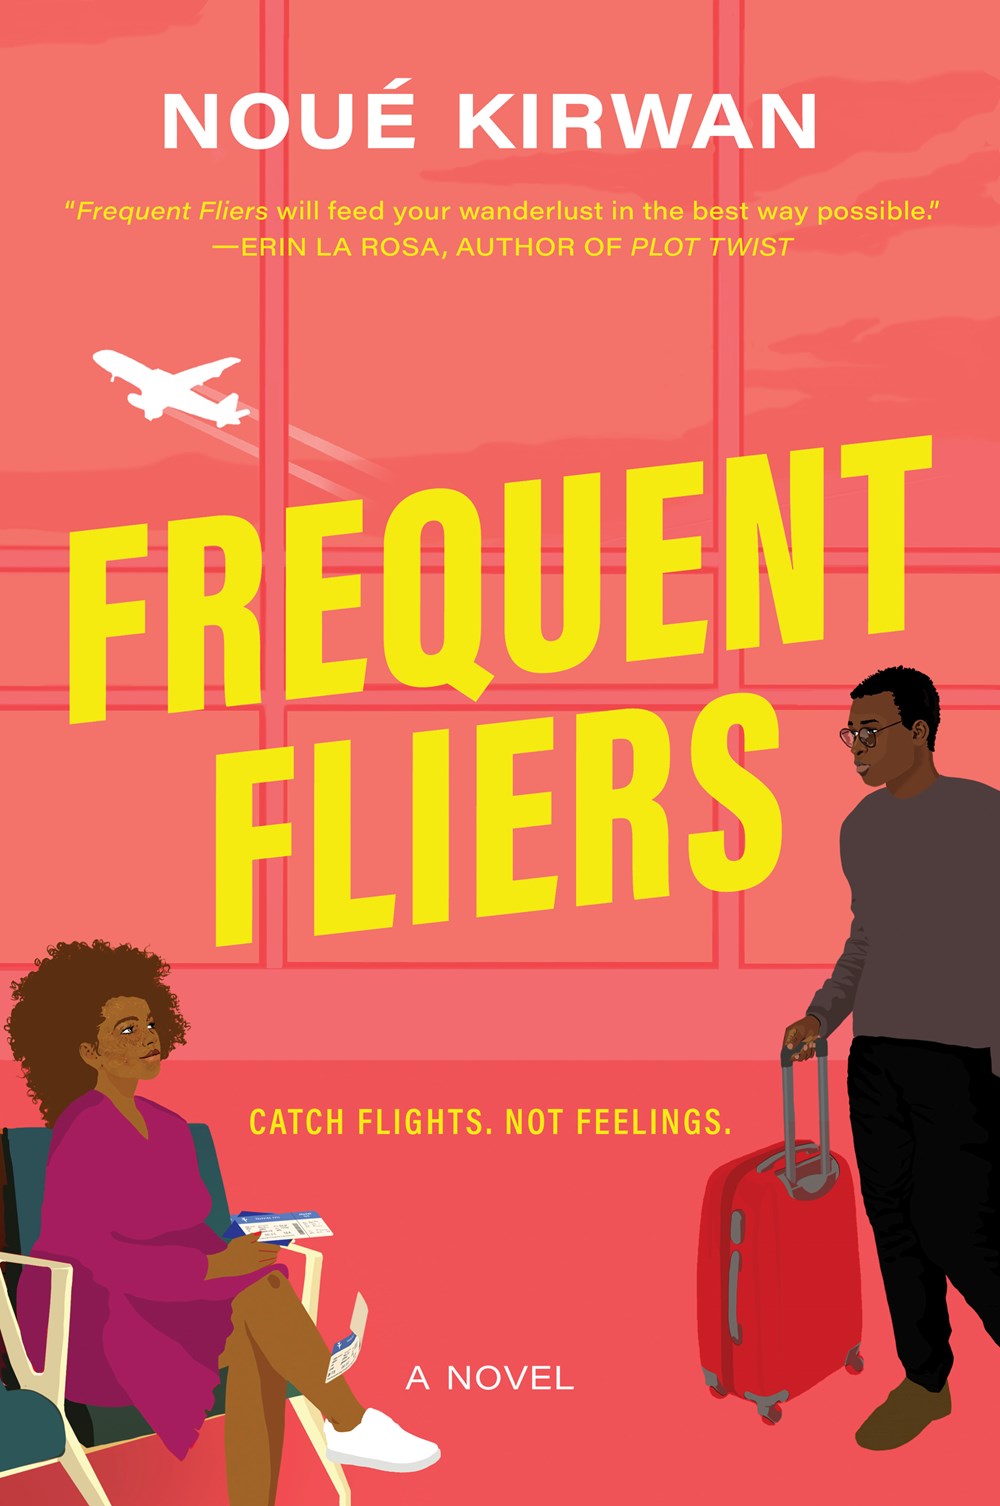 Frequent Fliers by Noué Kirwan (Paperback) (PREORDER)